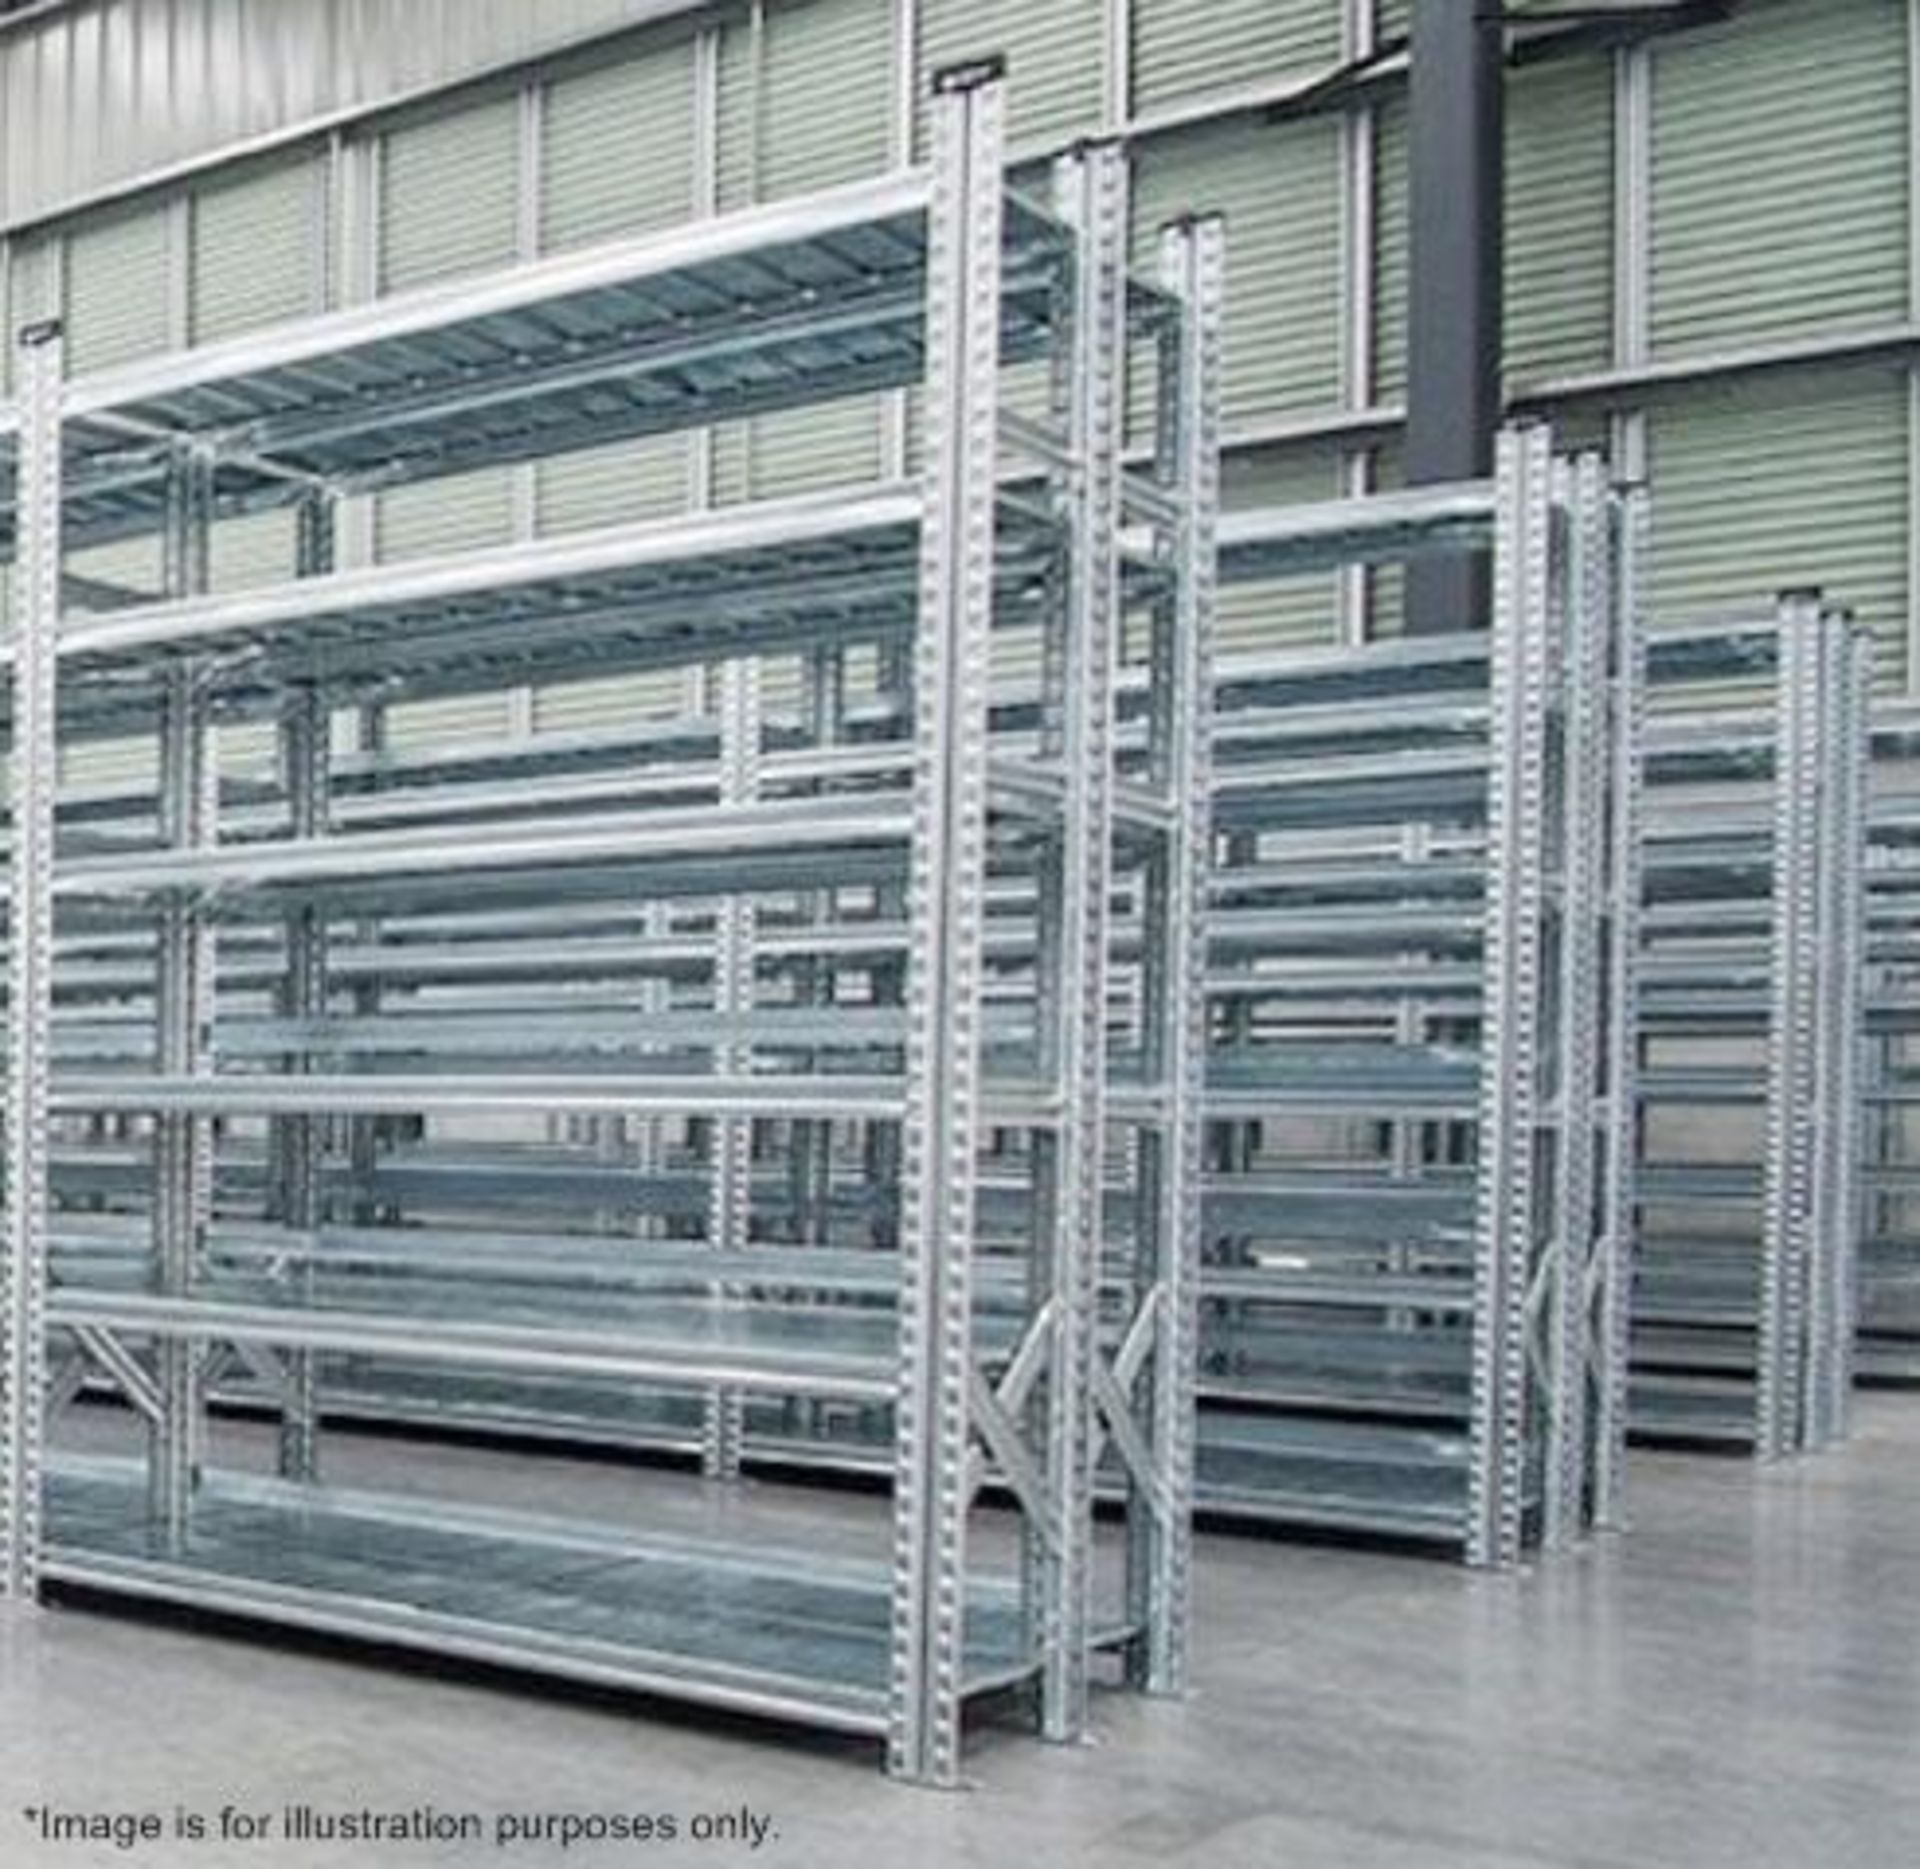 3 x Bays of Metalsistem Steel Modular Storage Shelving - Includes 28 Pieces -  Recently Removed From - Image 14 of 17